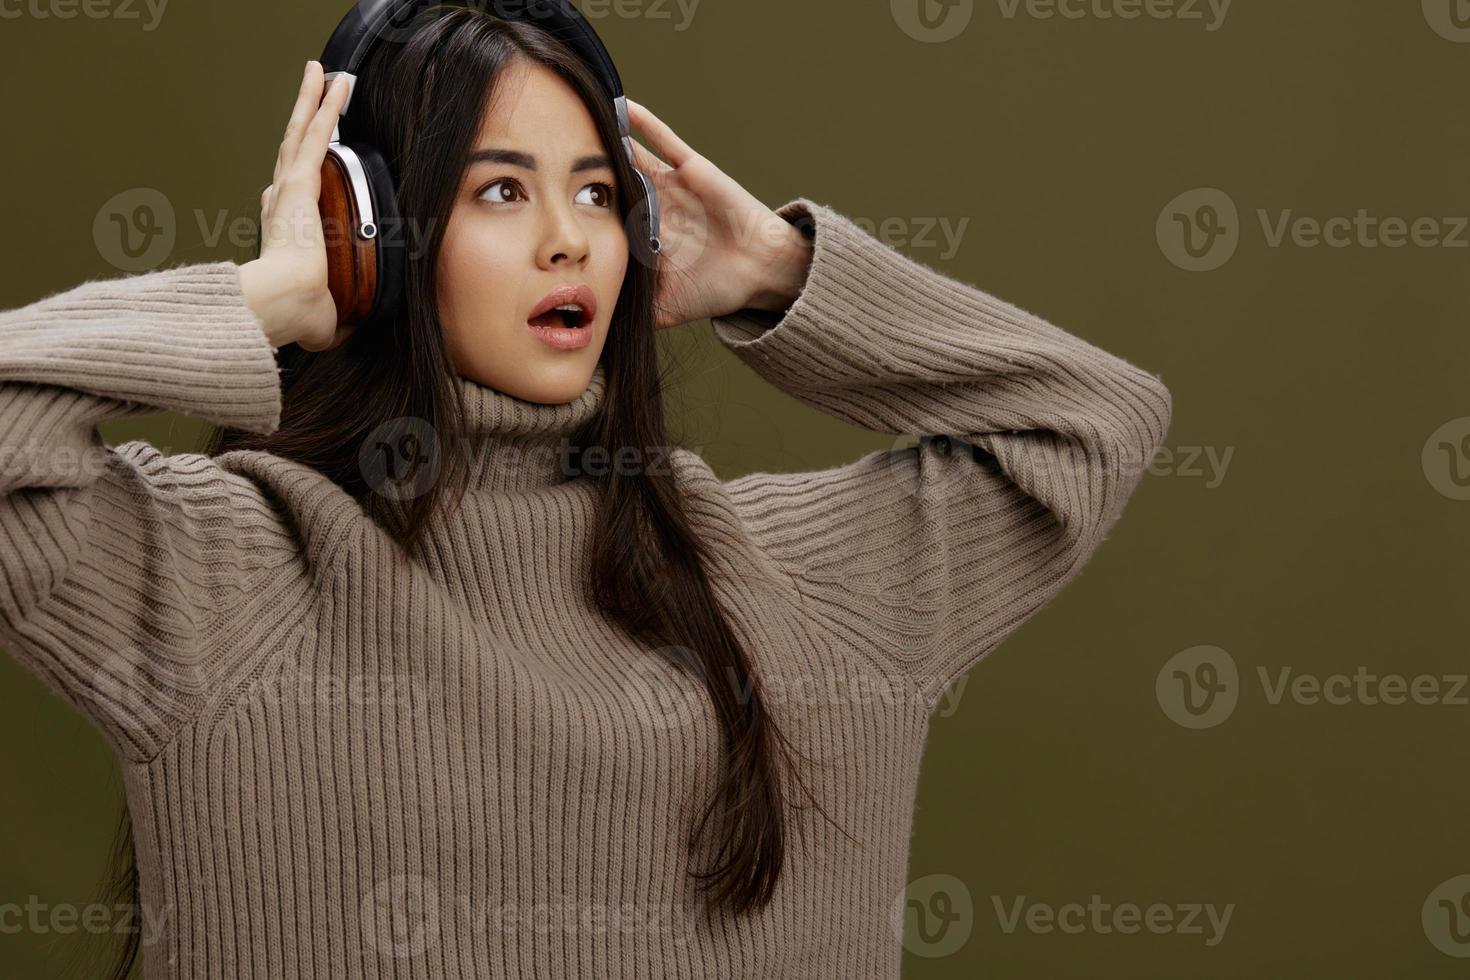 woman in a sweater listening to music with headphones fun studio model photo